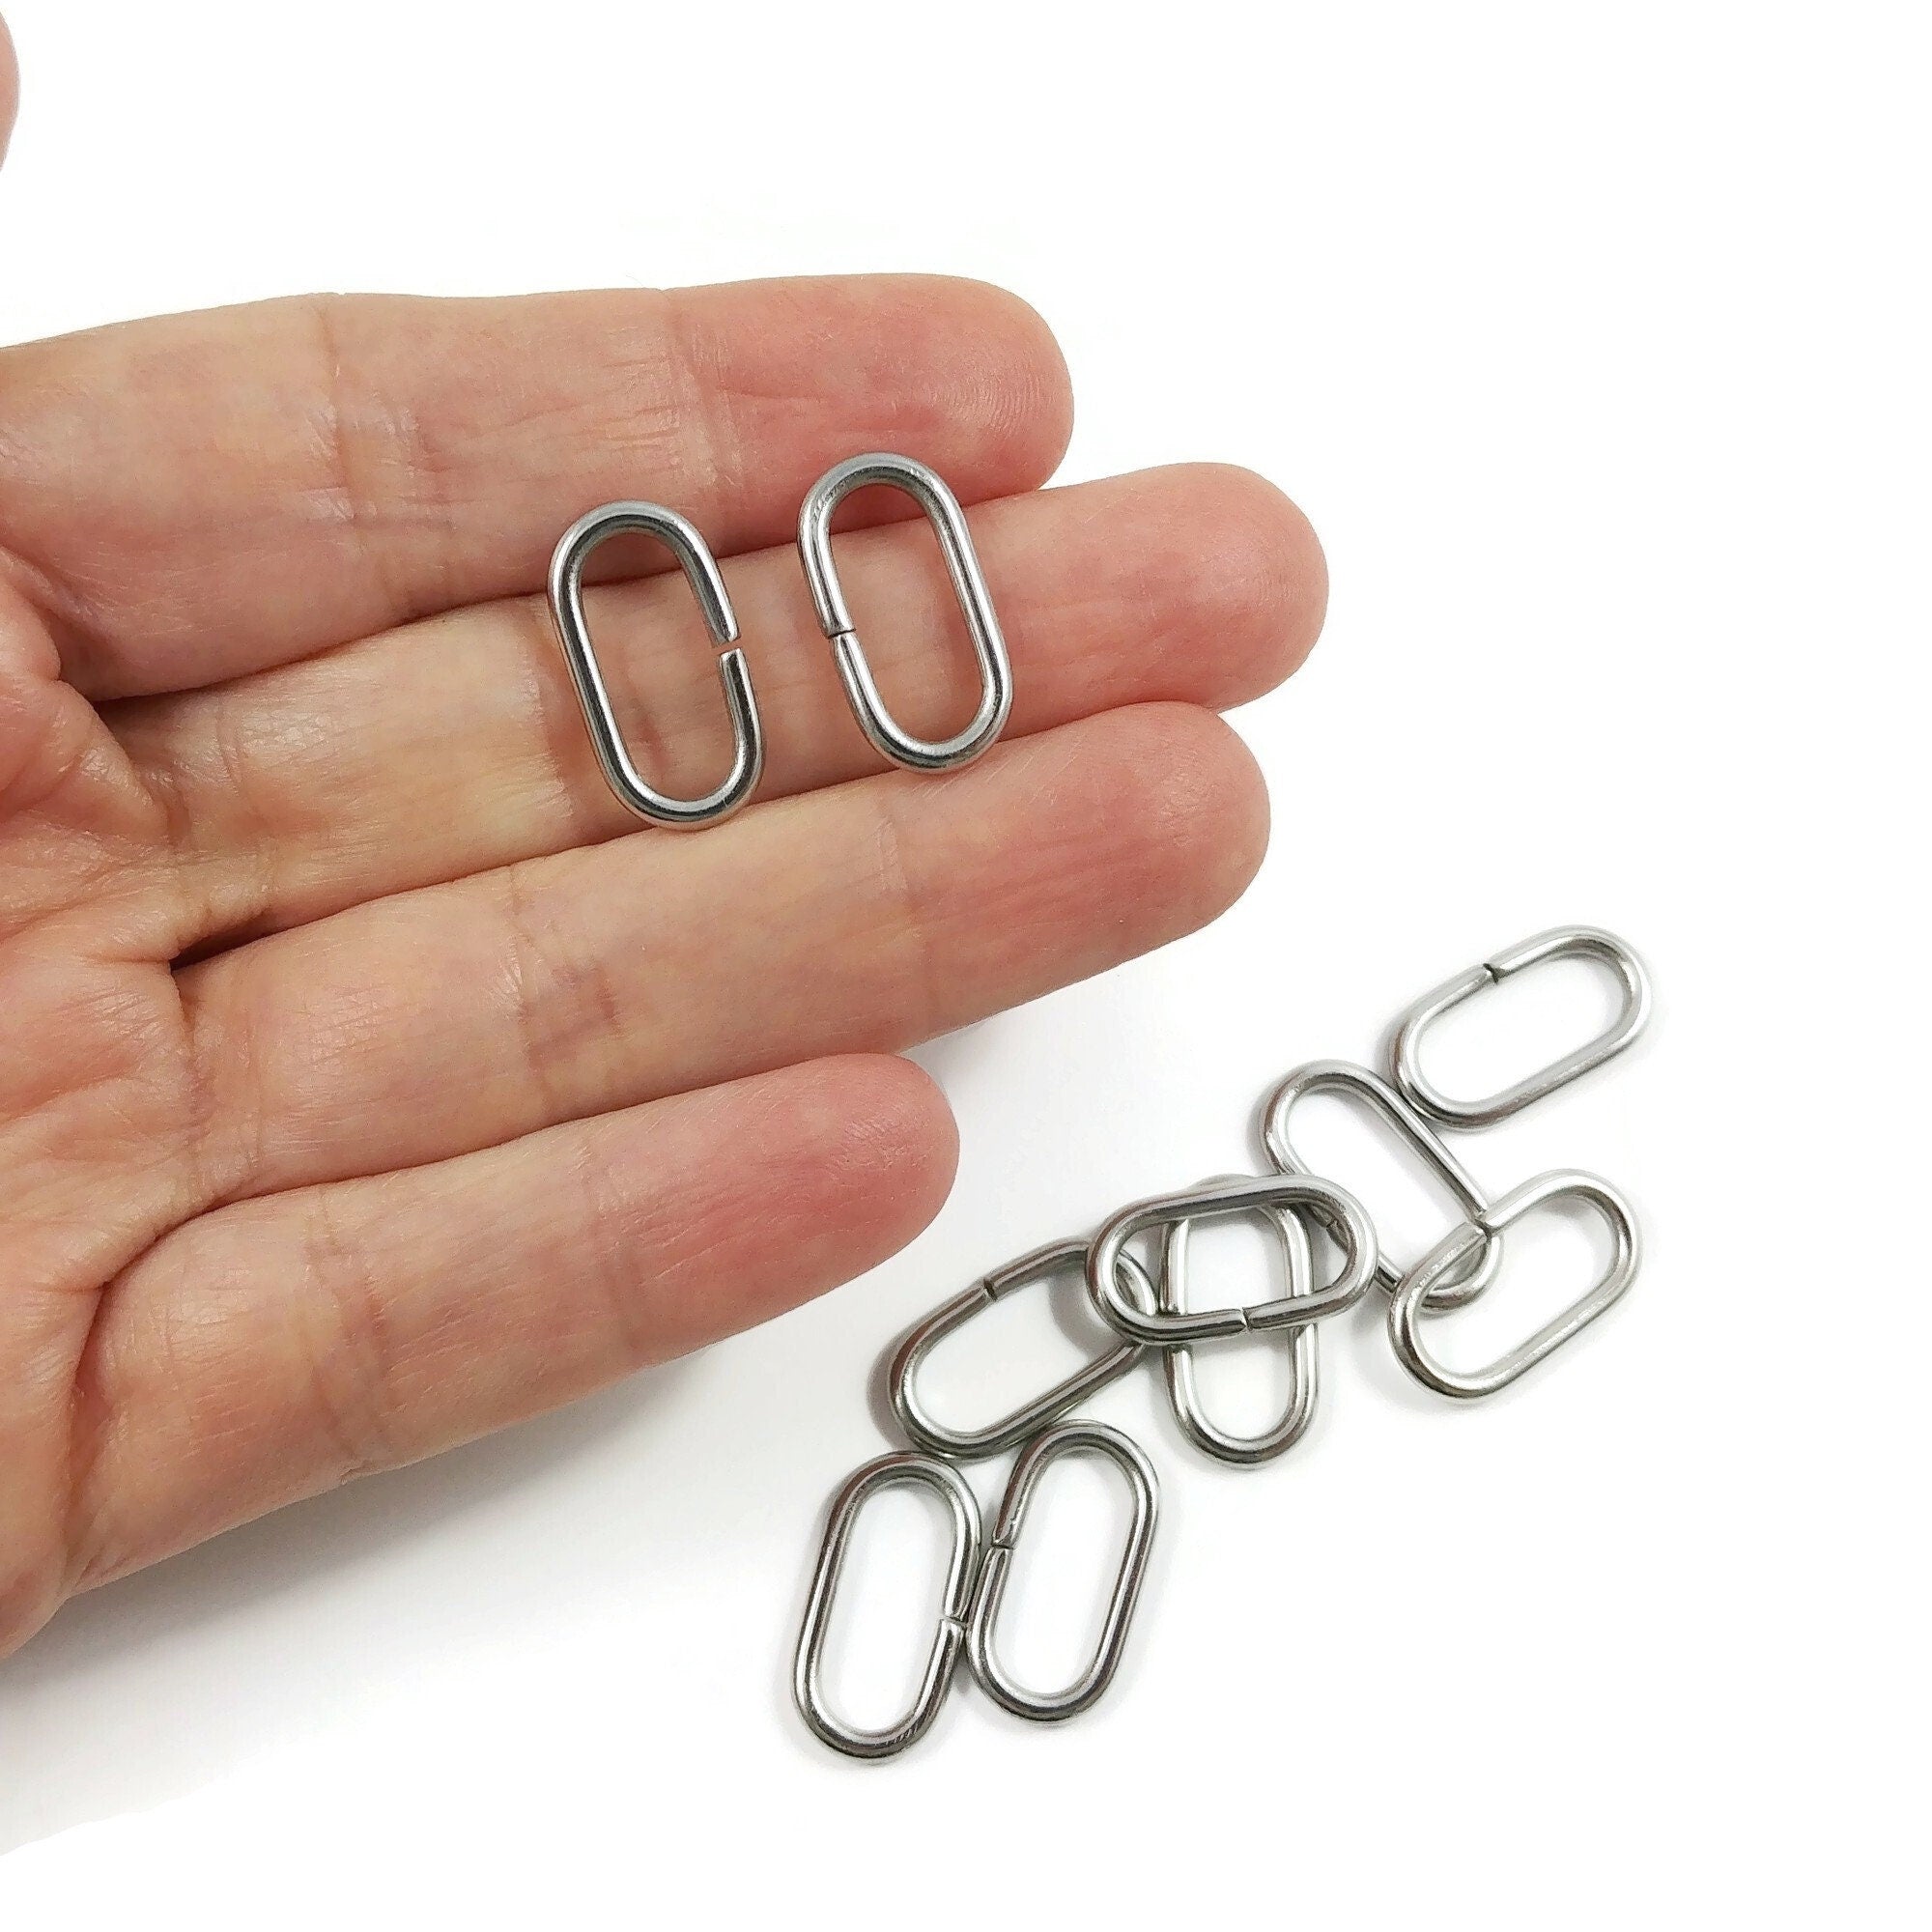 Large oval jump rings, 10pcs stainless steel open jumprings, 12 gauge hardware for jewelry making